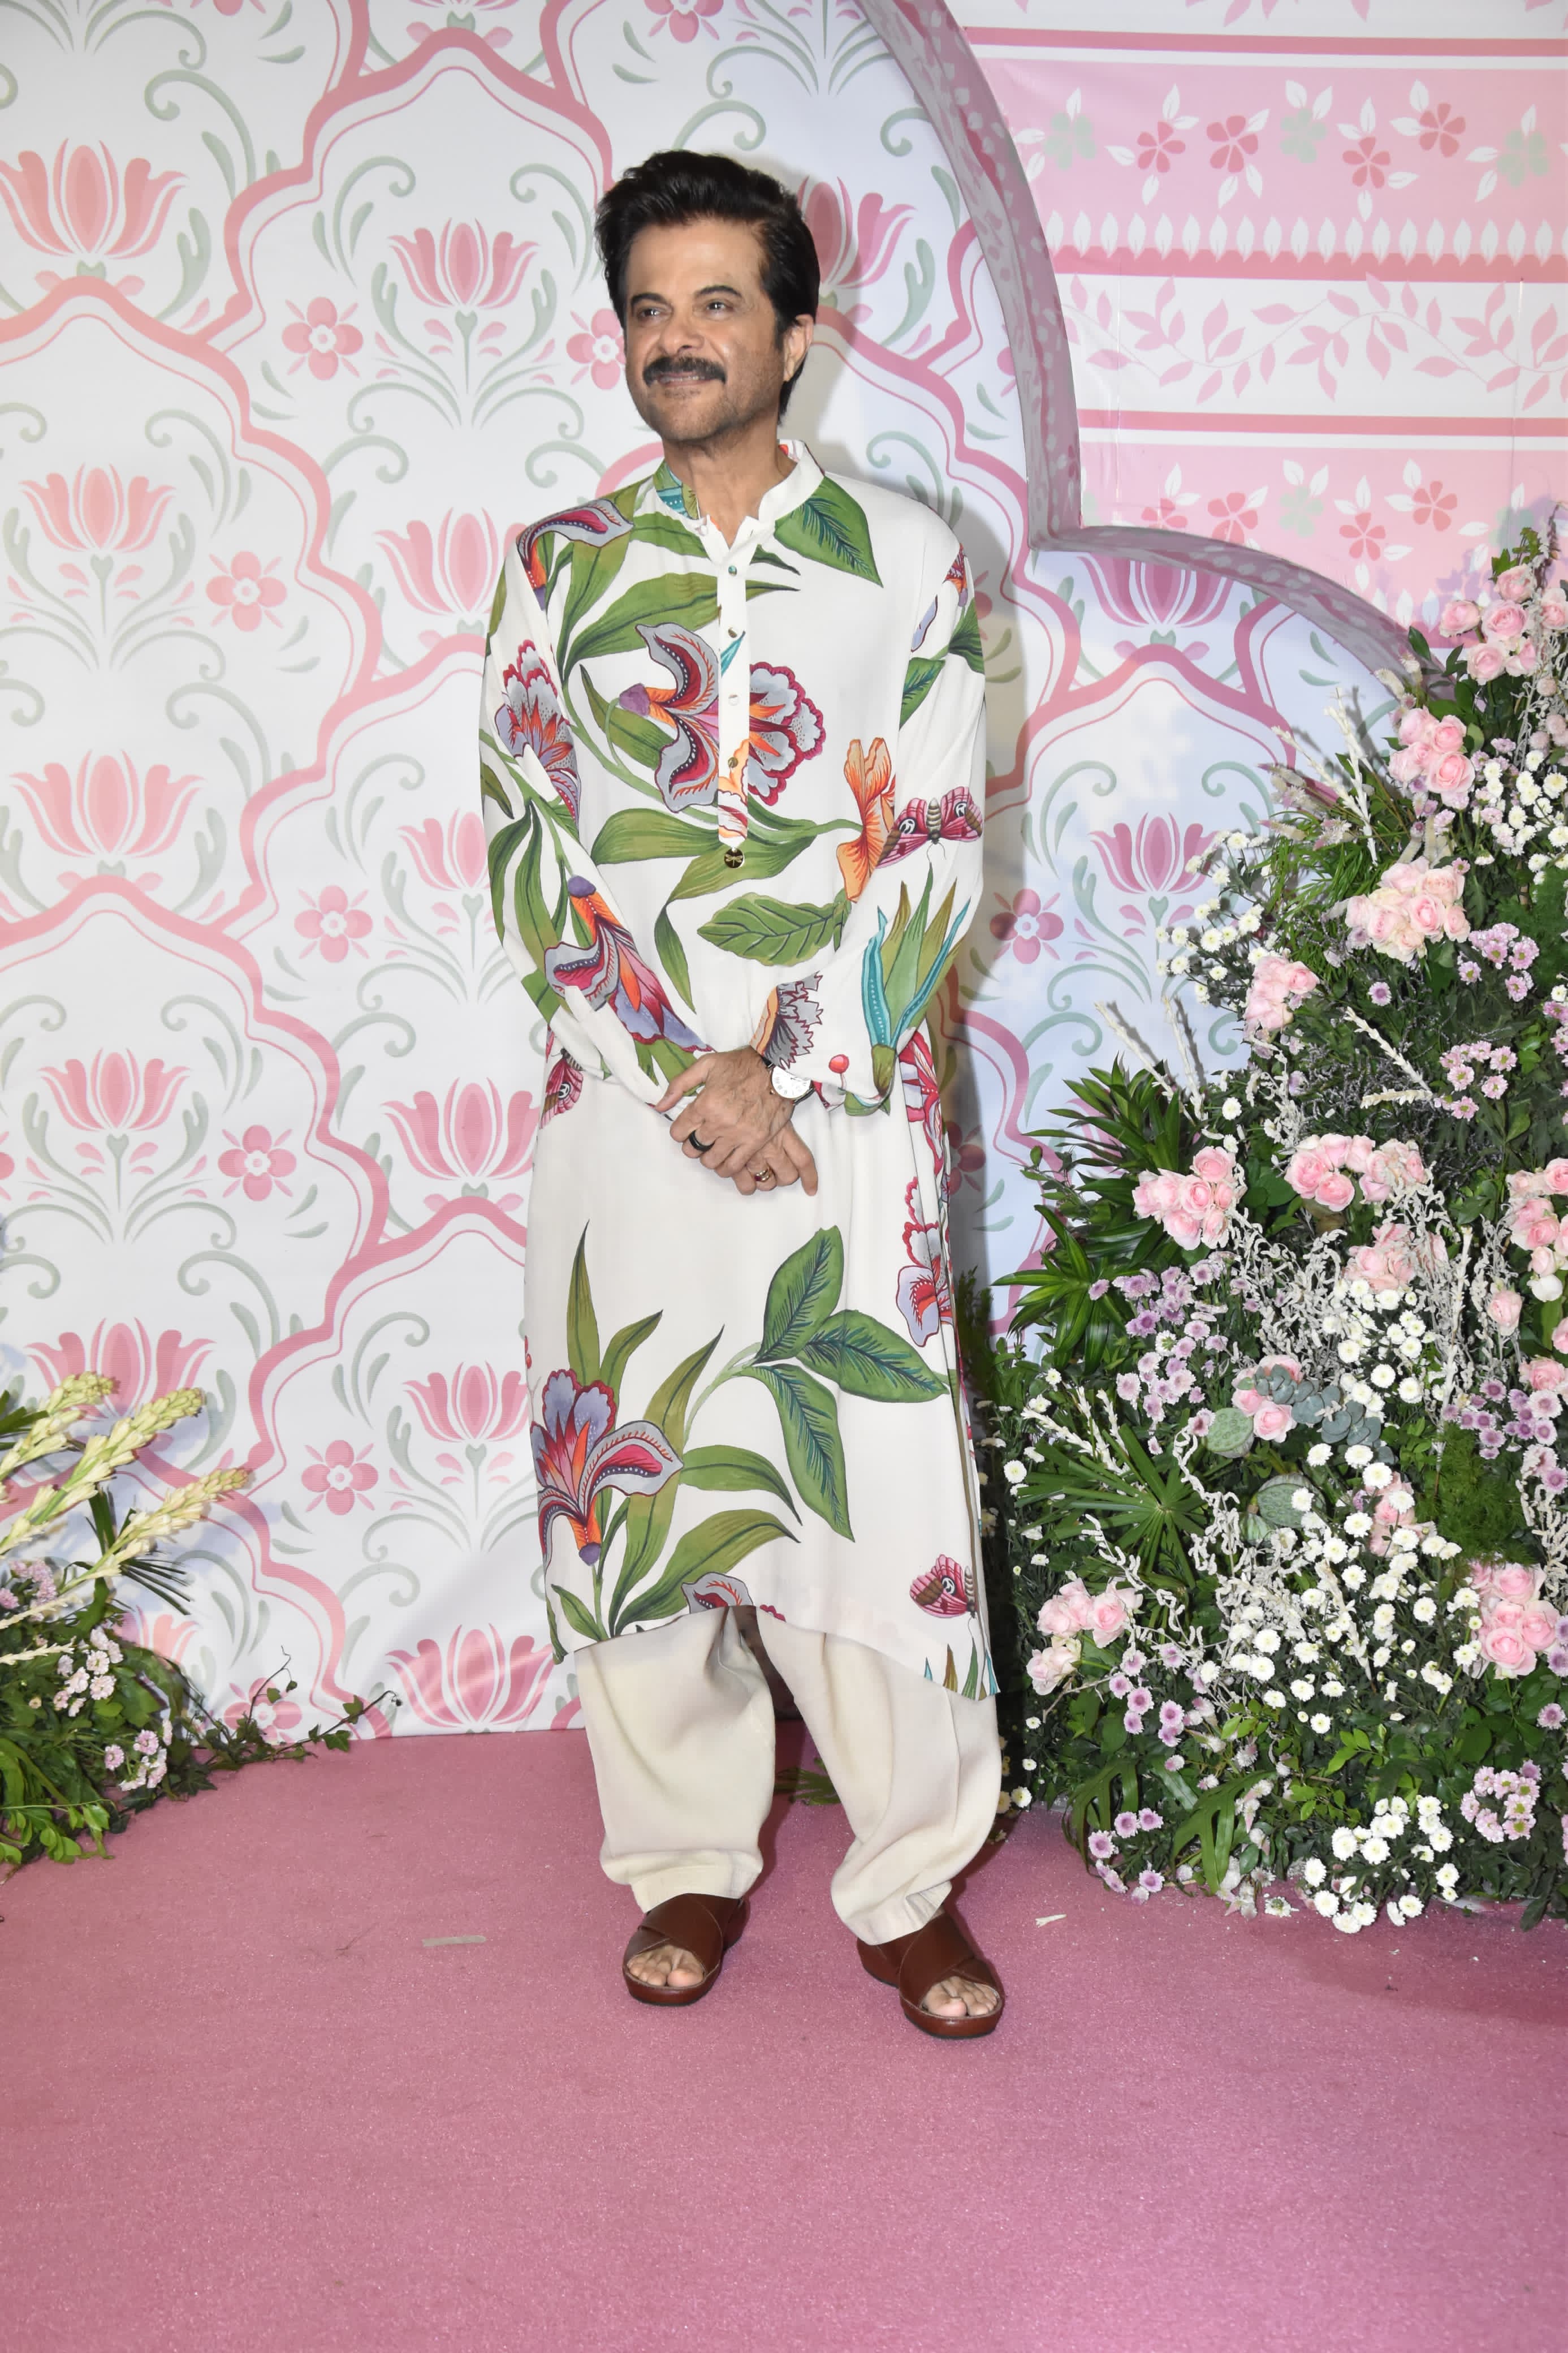 The timeless actor chose a kurta with nature motifs. He looked suave as always